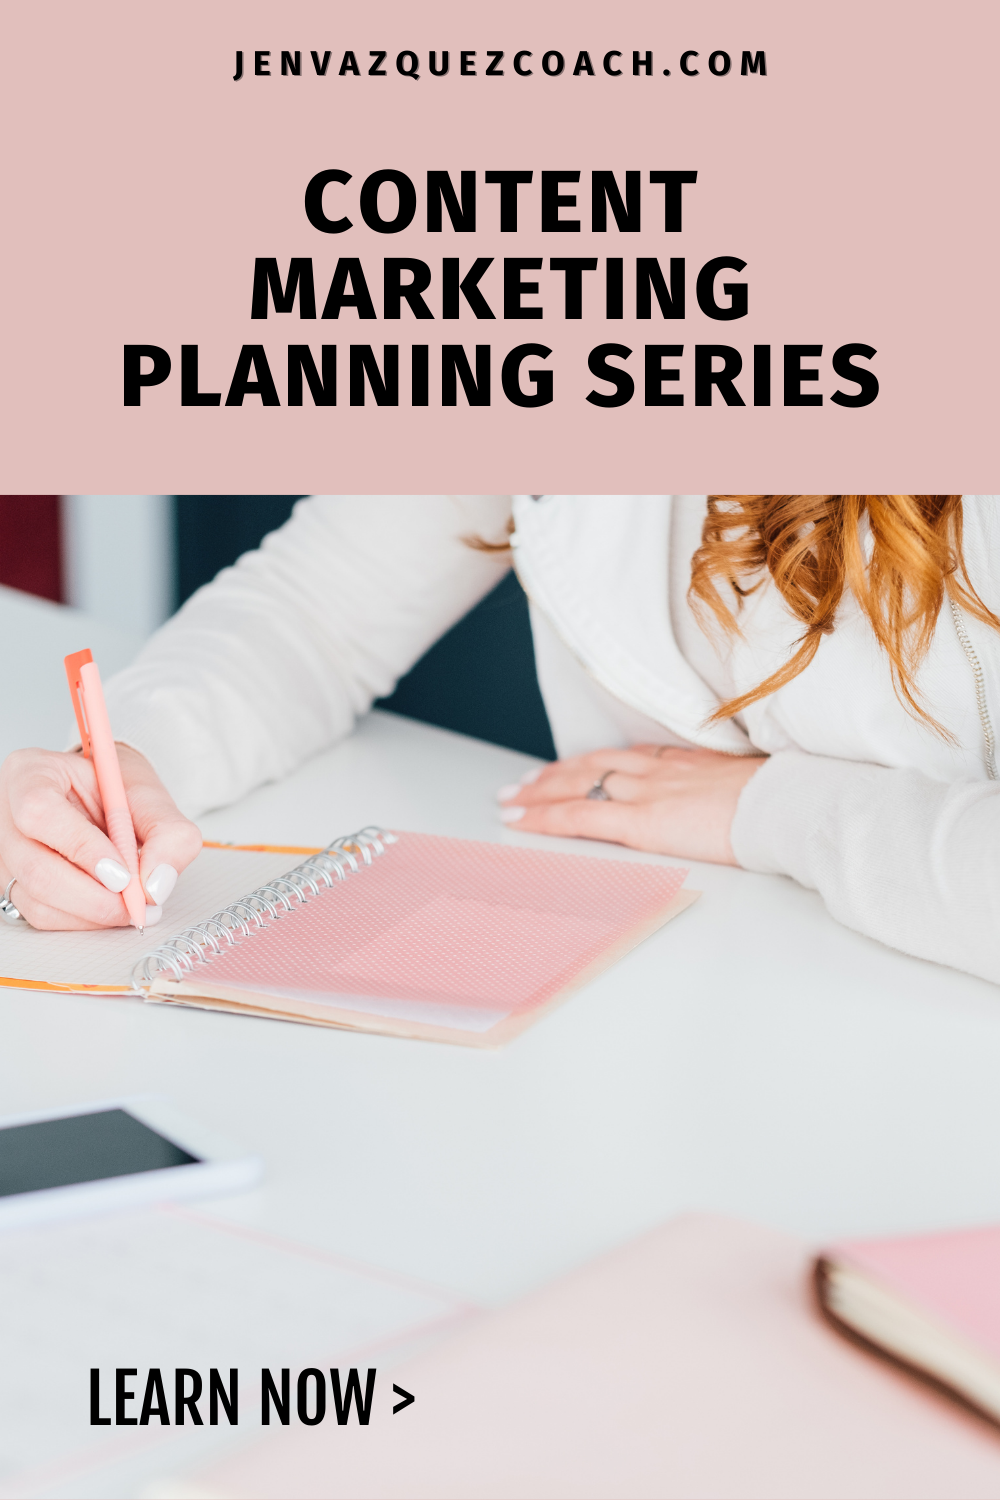 Content Marketing Planning Series Part 3:<br />
Picking Core Content and Using AI to Generate It by Jen Vazquez Media